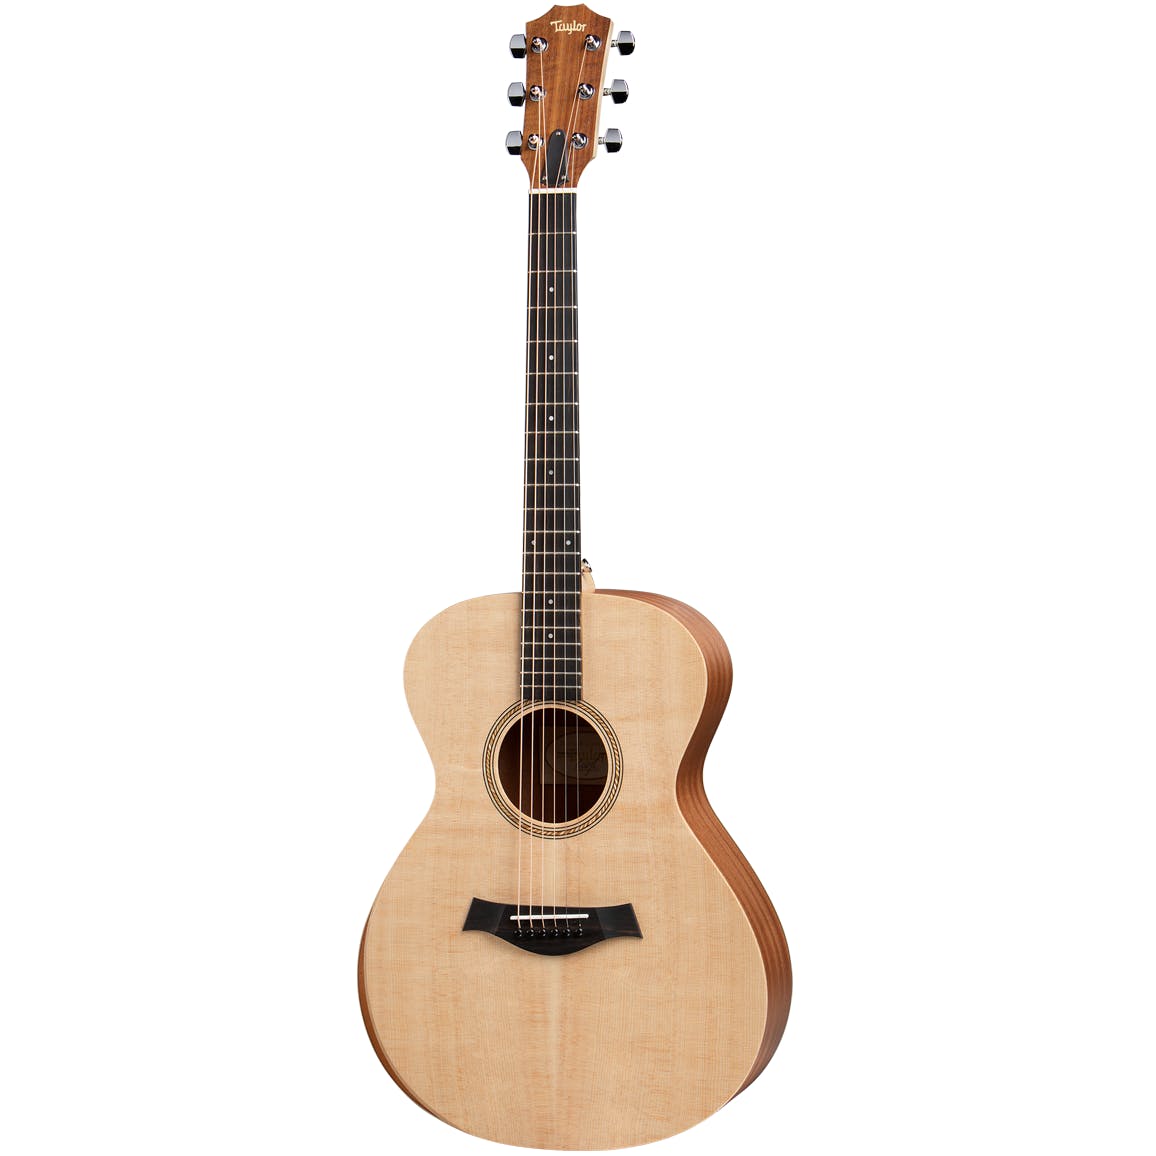 Taylor Academy 12 Series Acoustic Guitar